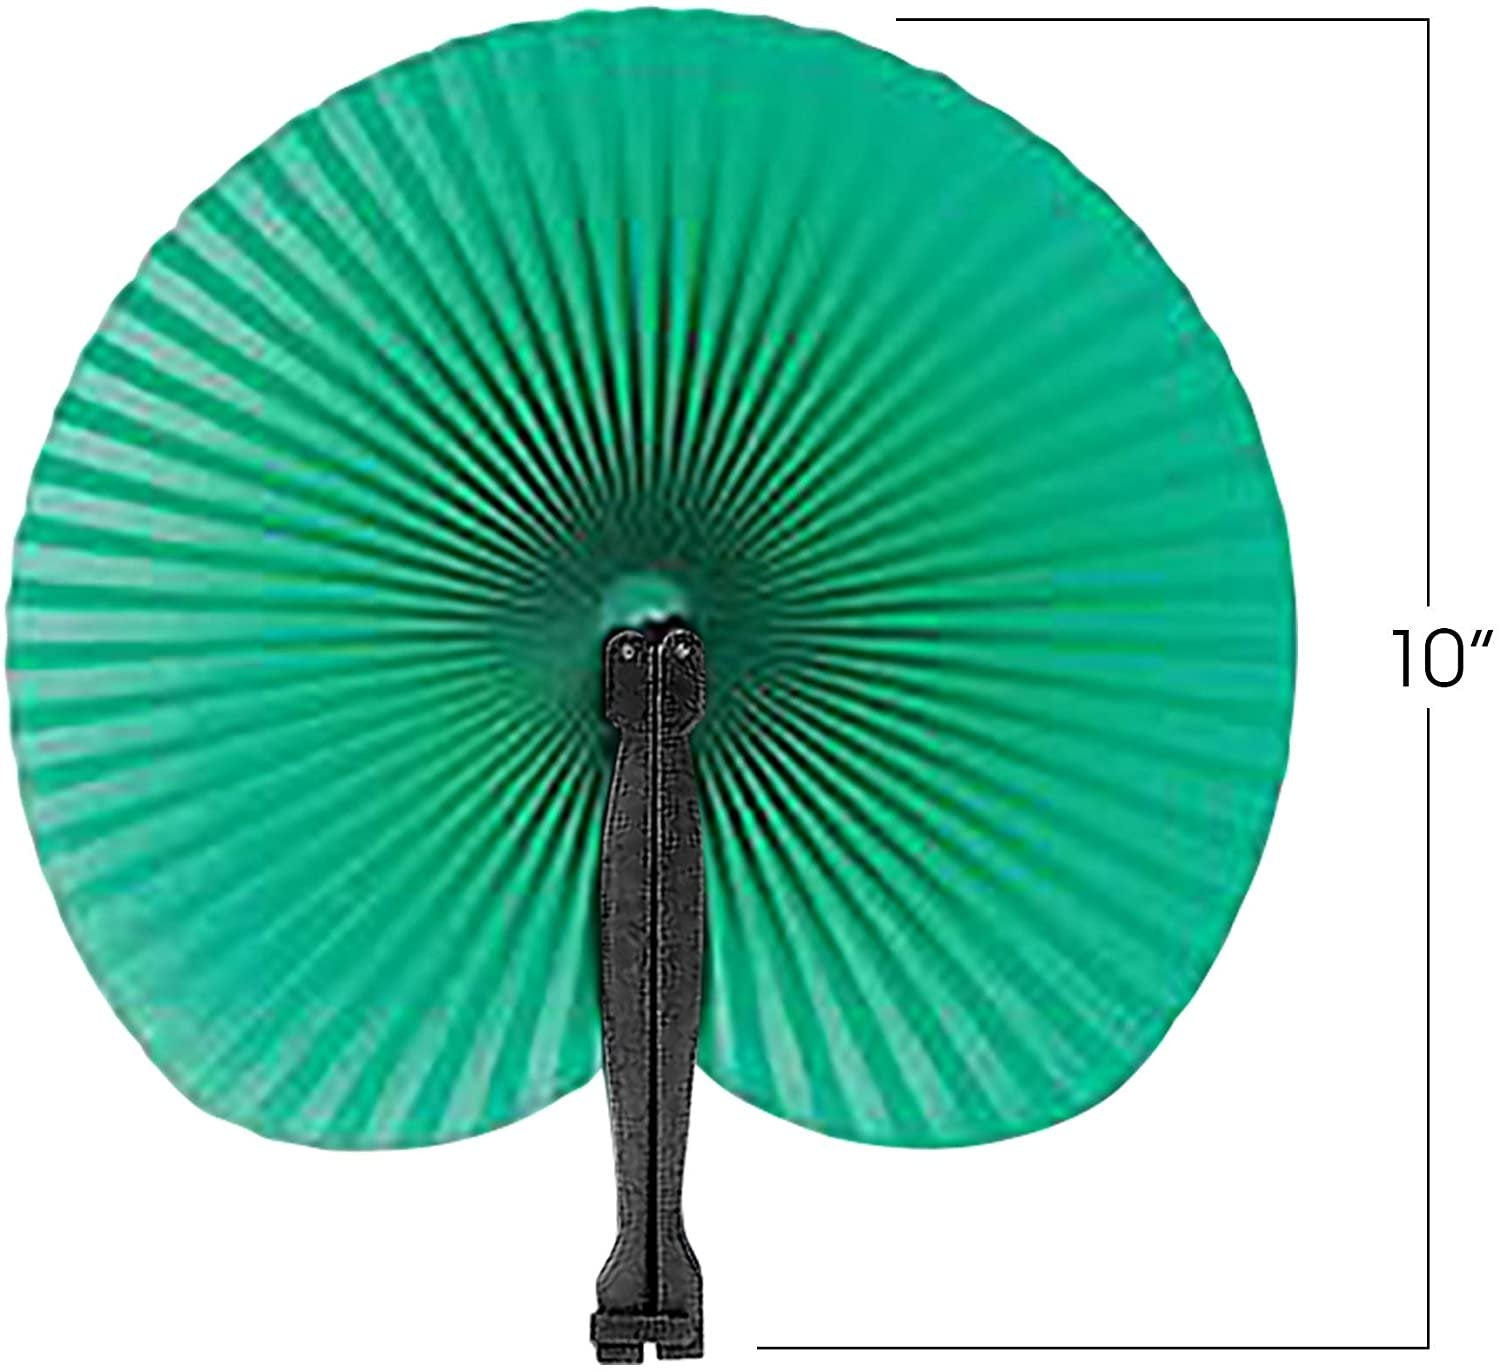 10" Colorful Folding Fans - Pack of 12 - Cool Summer Contraption - Handheld Paper Fan with Plastic Shafts - Hot New Party Favor and Prize - Fun Novelties, Gifts for Kids Ages 3+